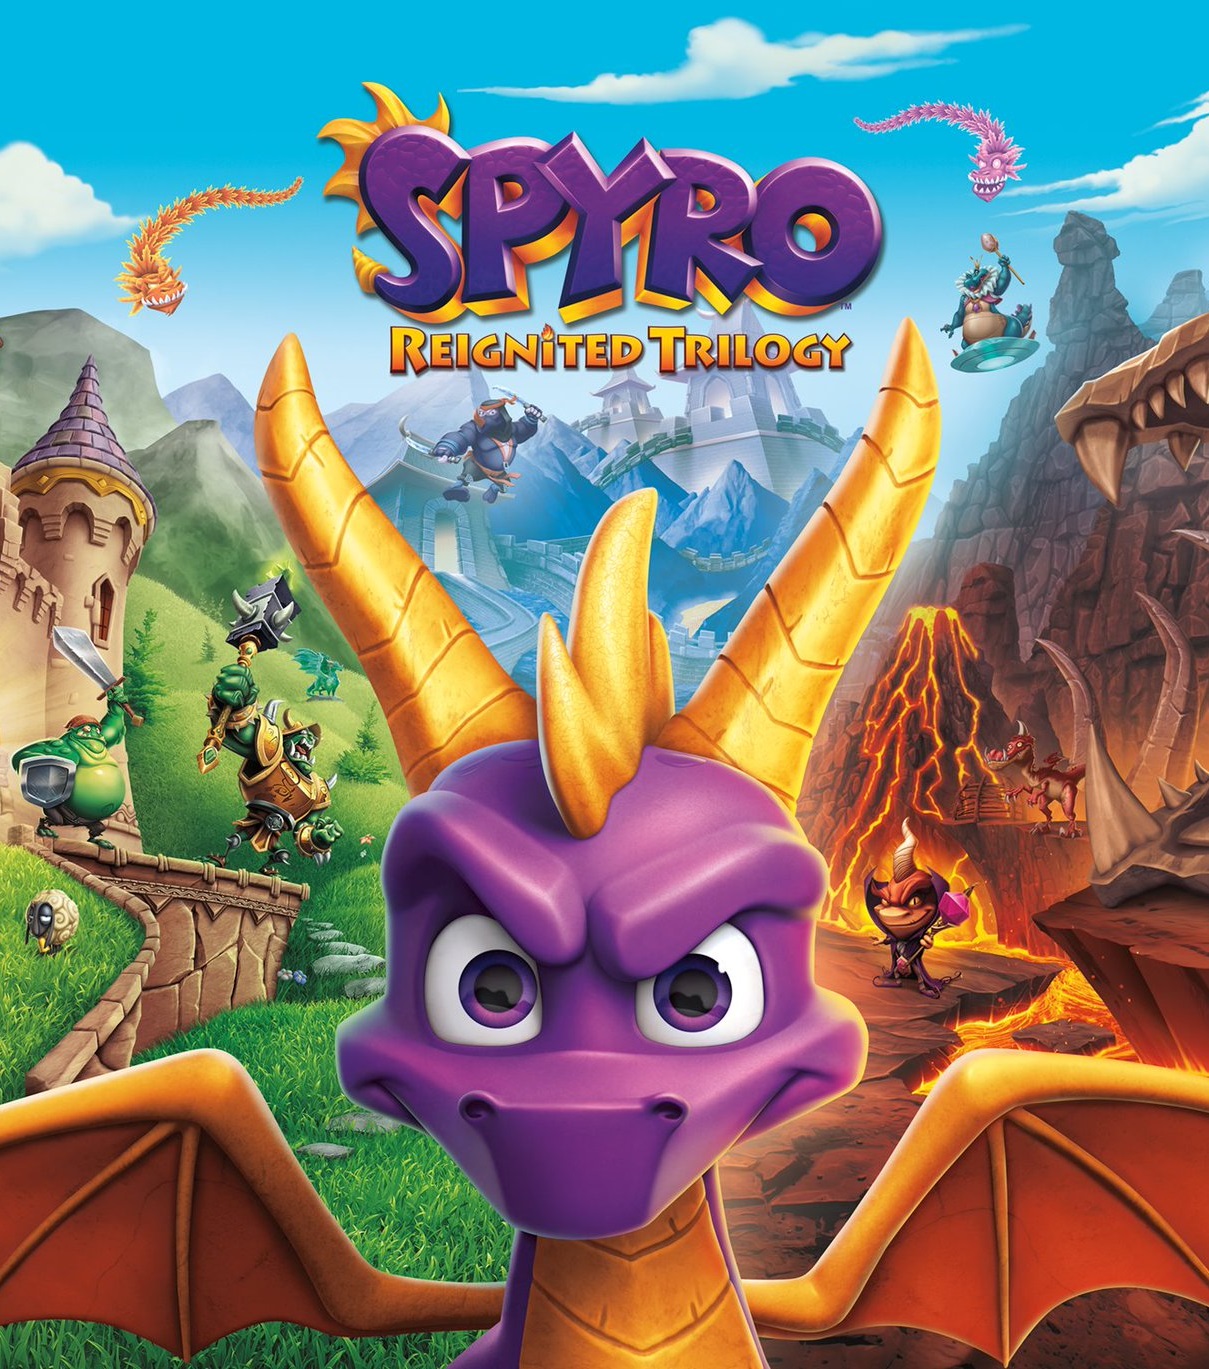 spyro enter the dragonfly ps4